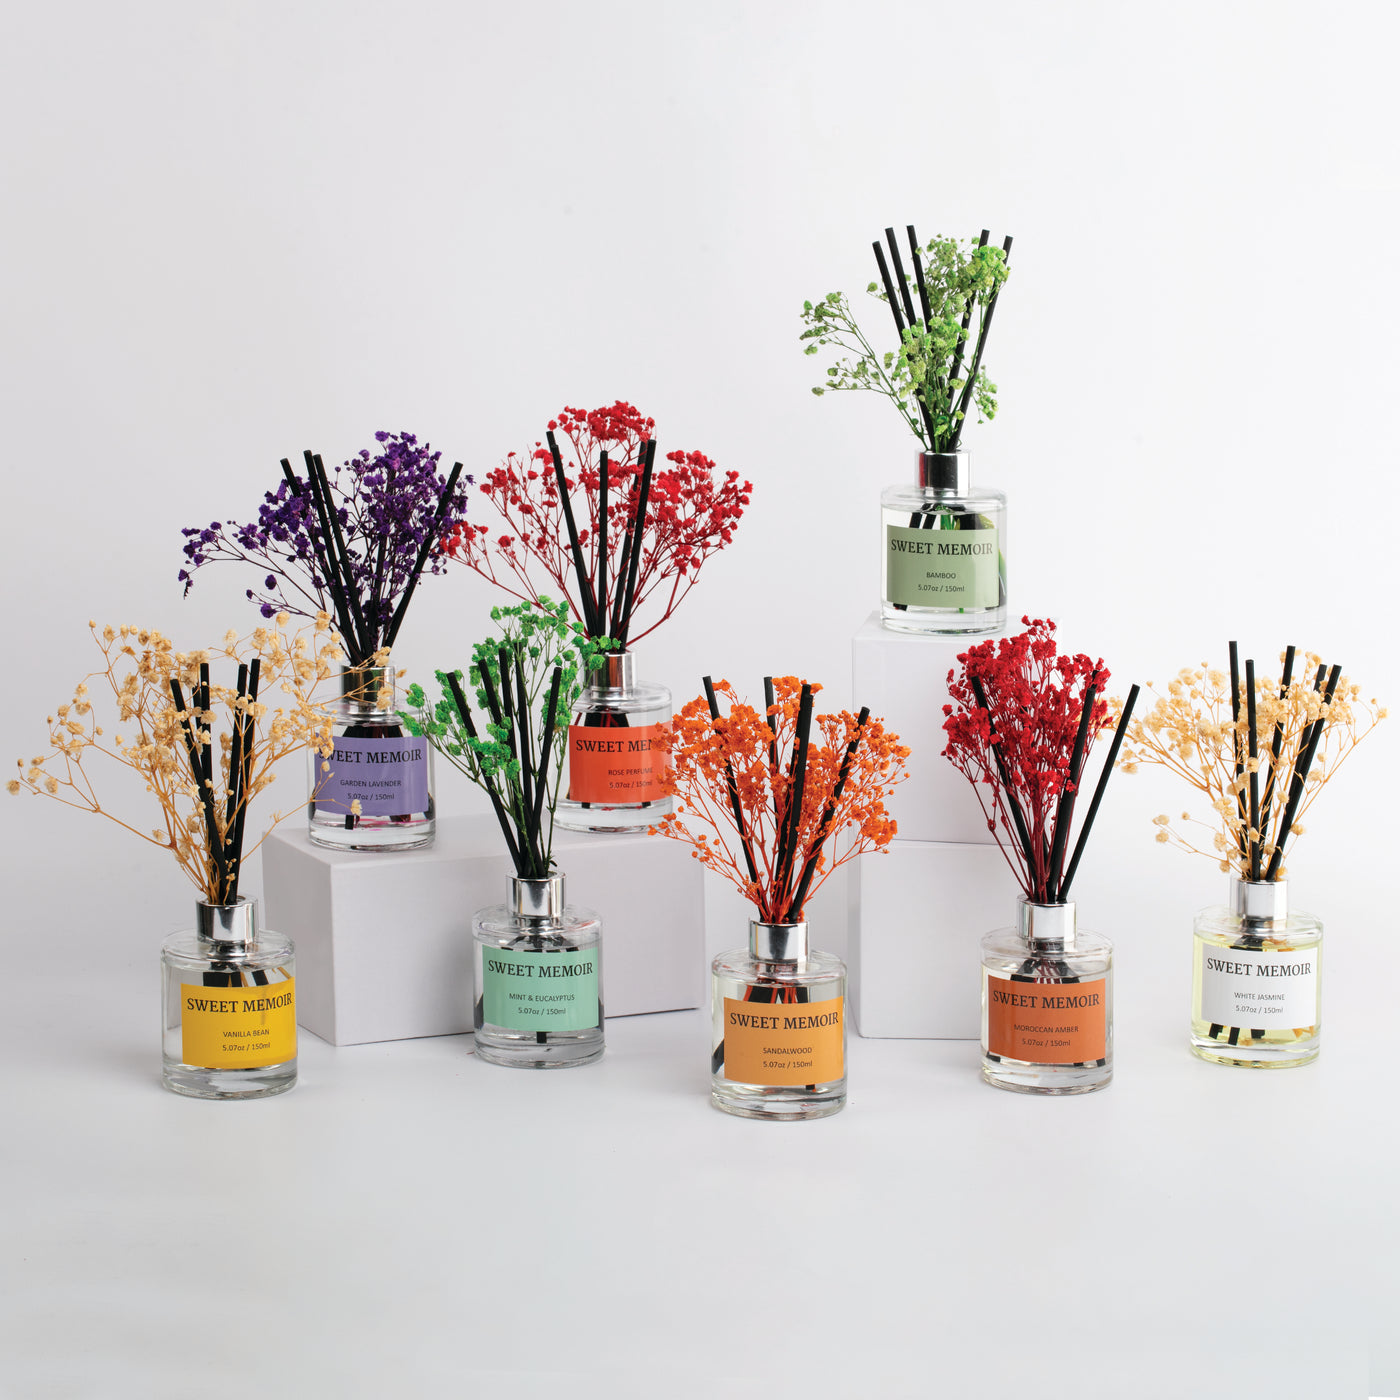 Variety of Sweet Memoir reed diffusers displayed, featuring a selection of scents and colorful reeds for a personalized aroma experience.